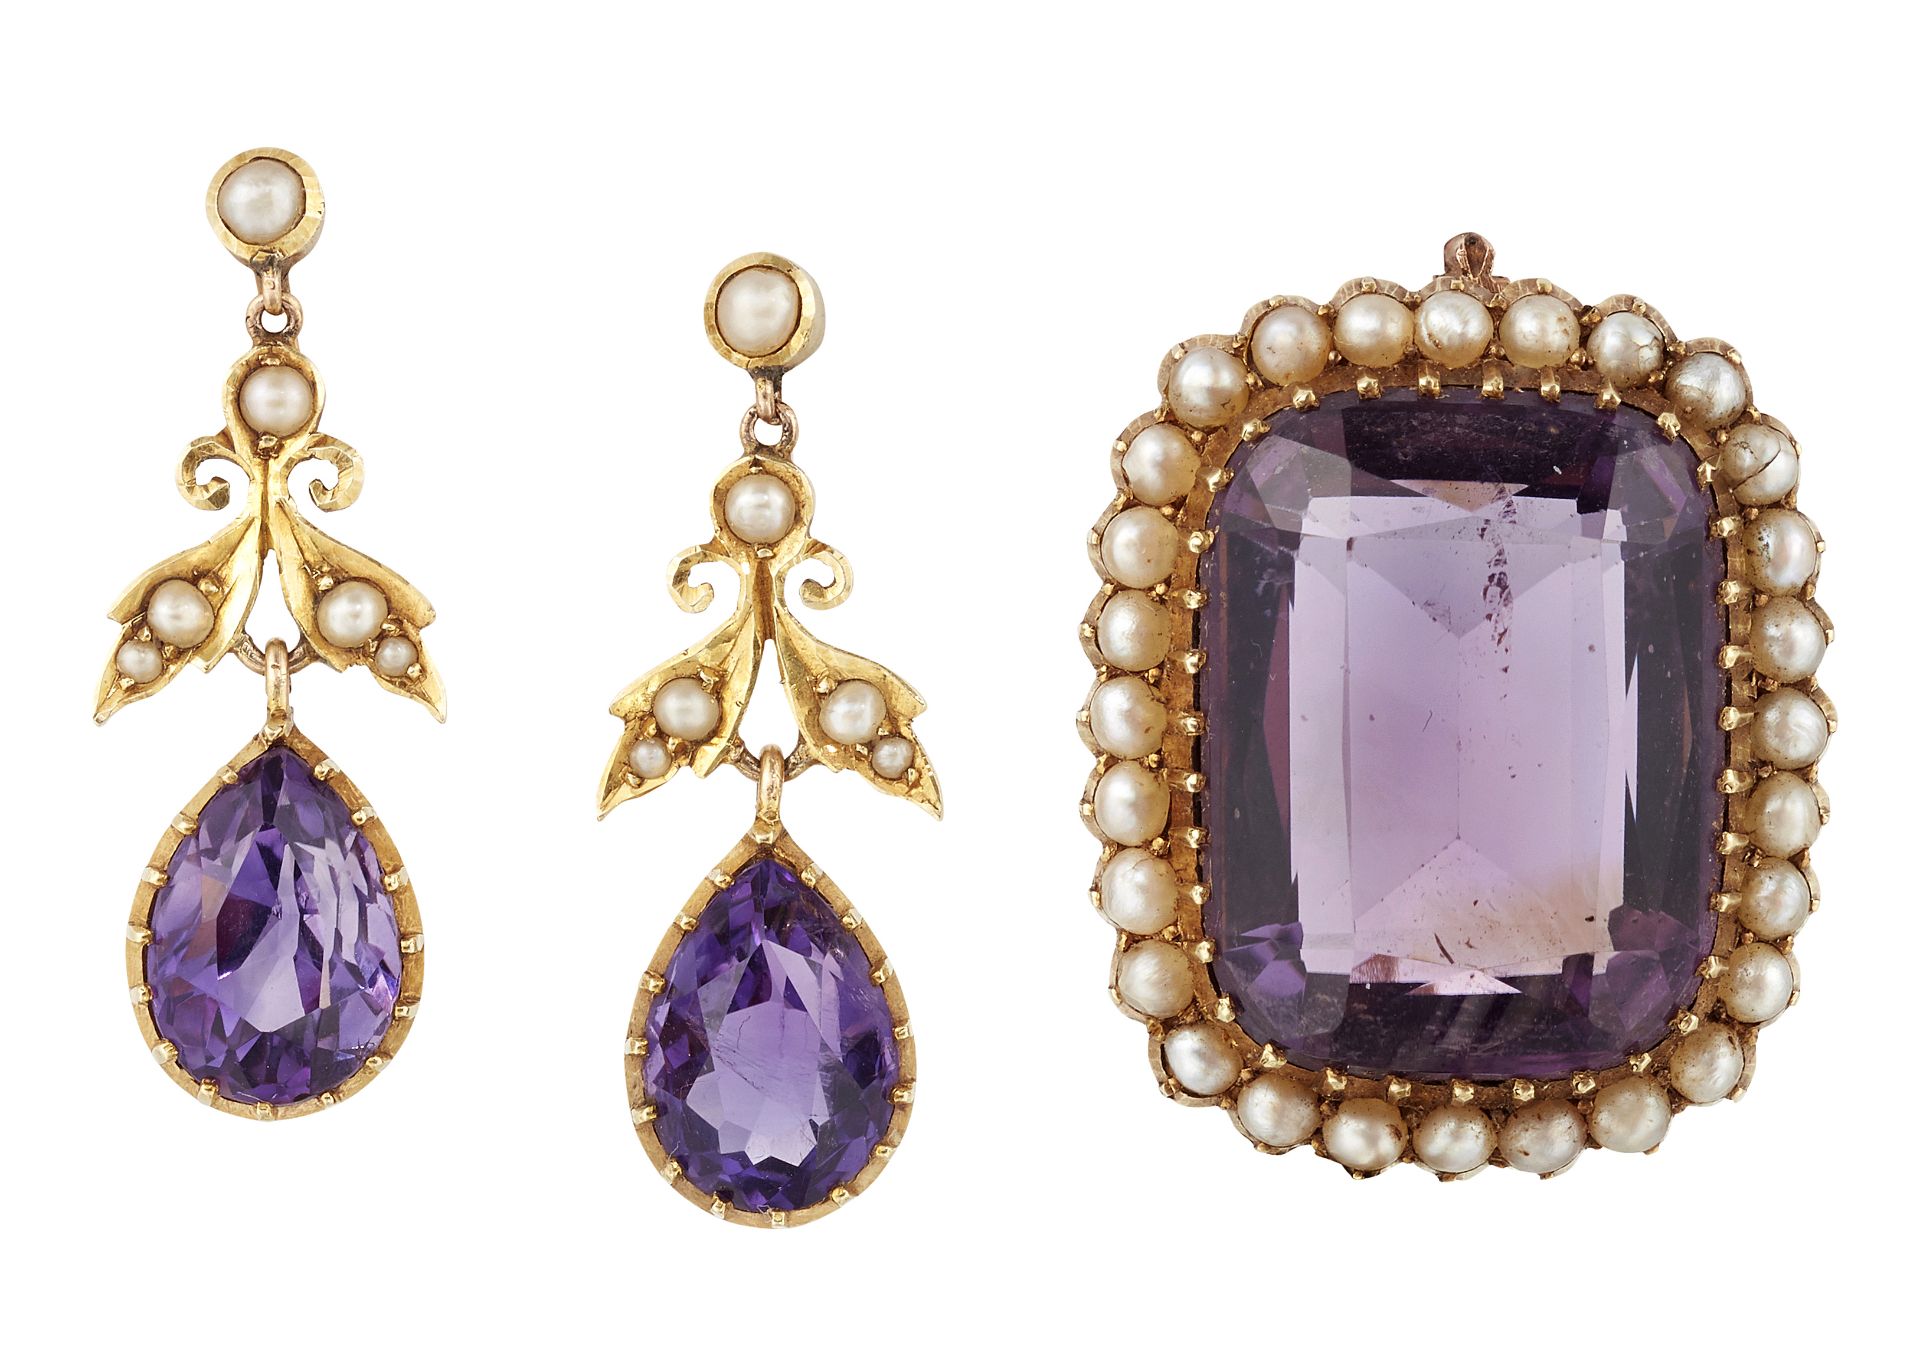 A PAIR OF VICTORIAN AMETHYST AND SEED PEARL EARRINGS AND AN AMETHYST AND SEED PEARL BROOCH